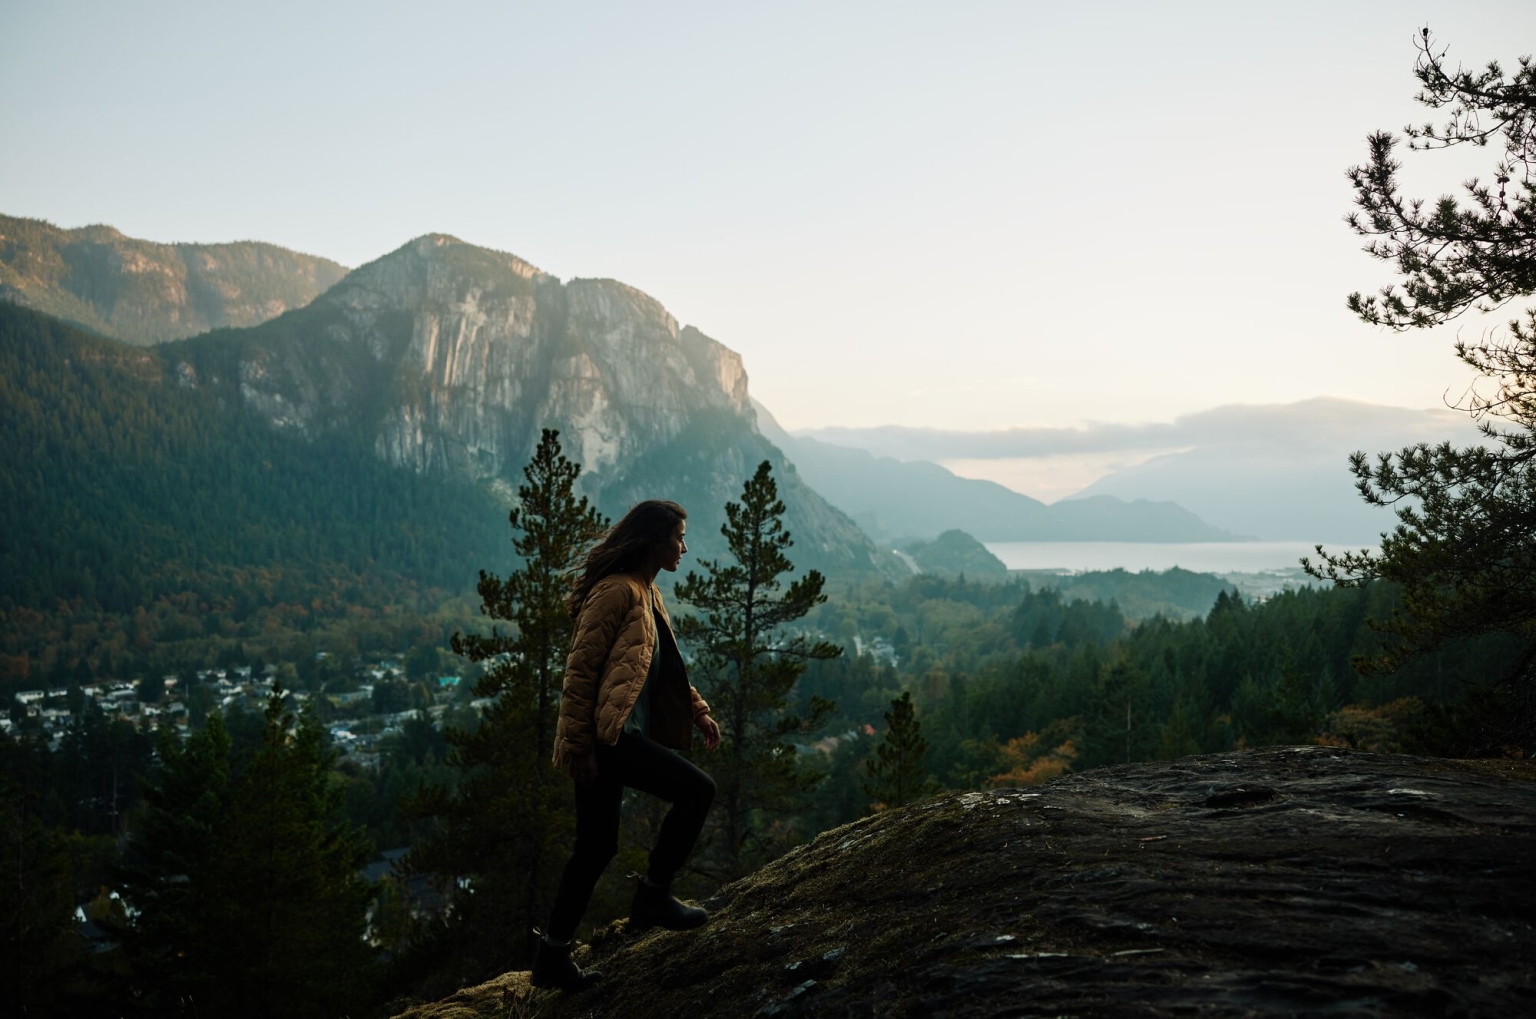 A person hikes along a granite rockface with views of Howe Sound and the Stawamus Chief monolith.